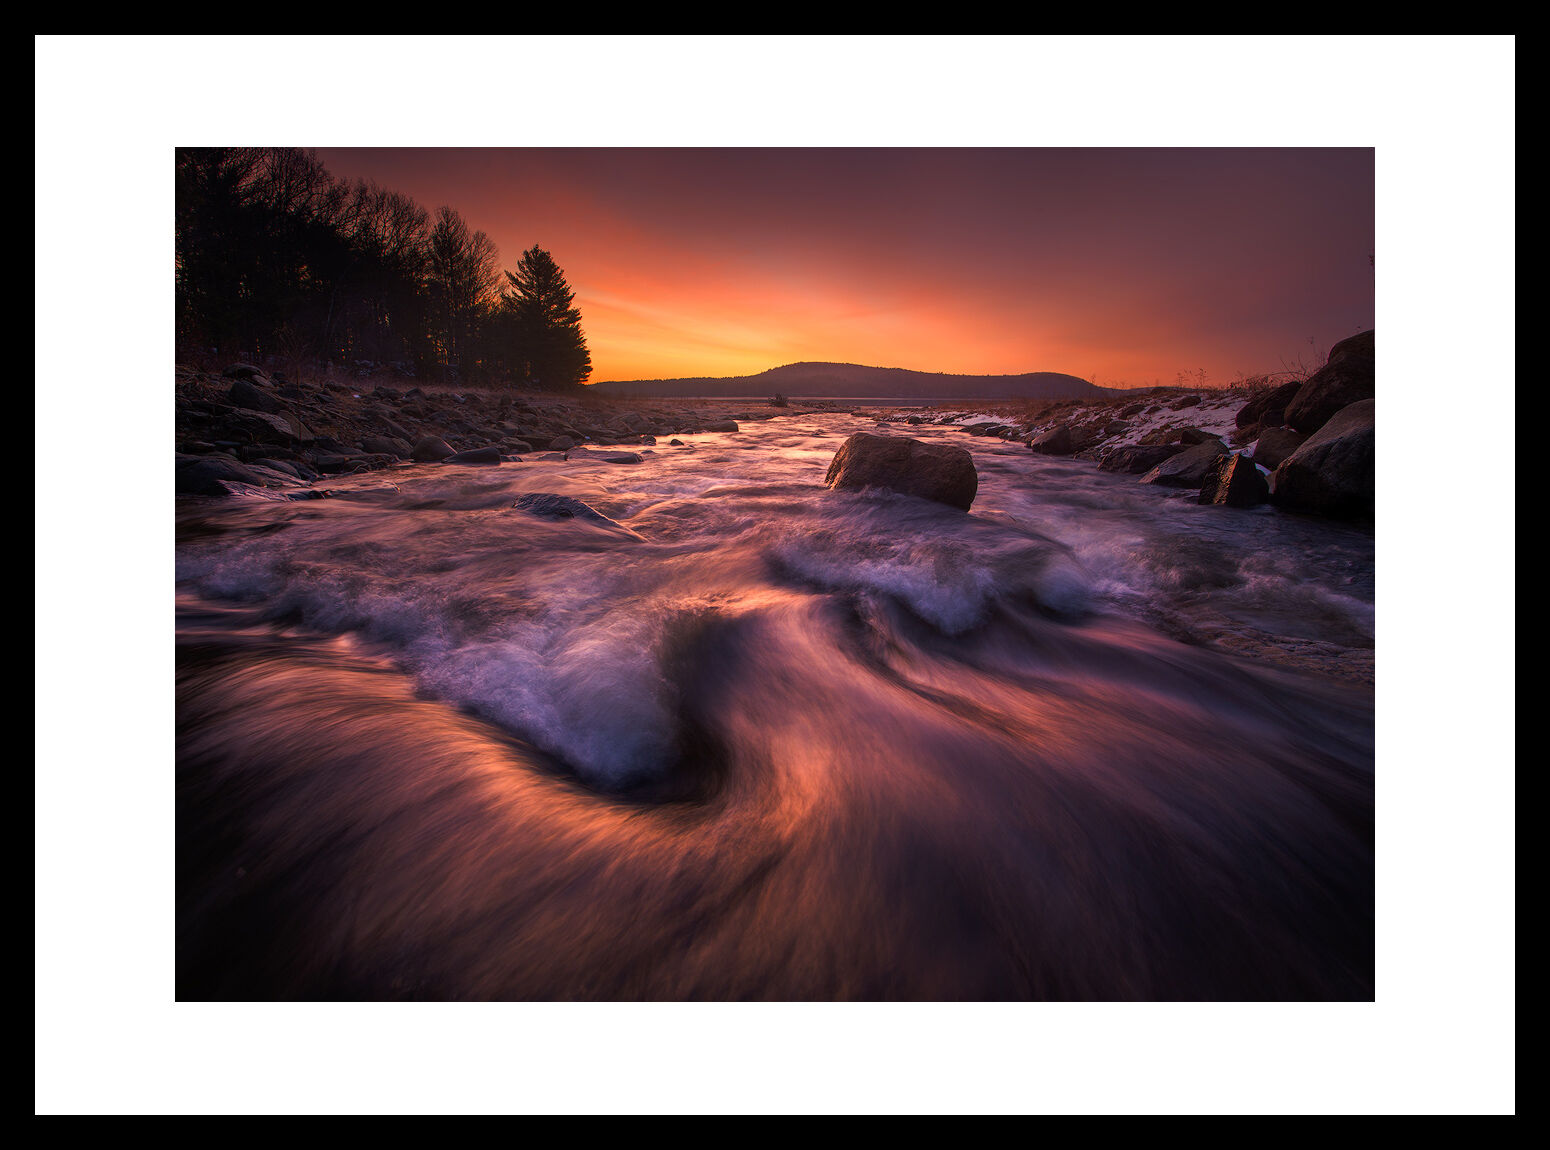 MATTED AND FRAMED PRINT - BLACK FRAME print preview